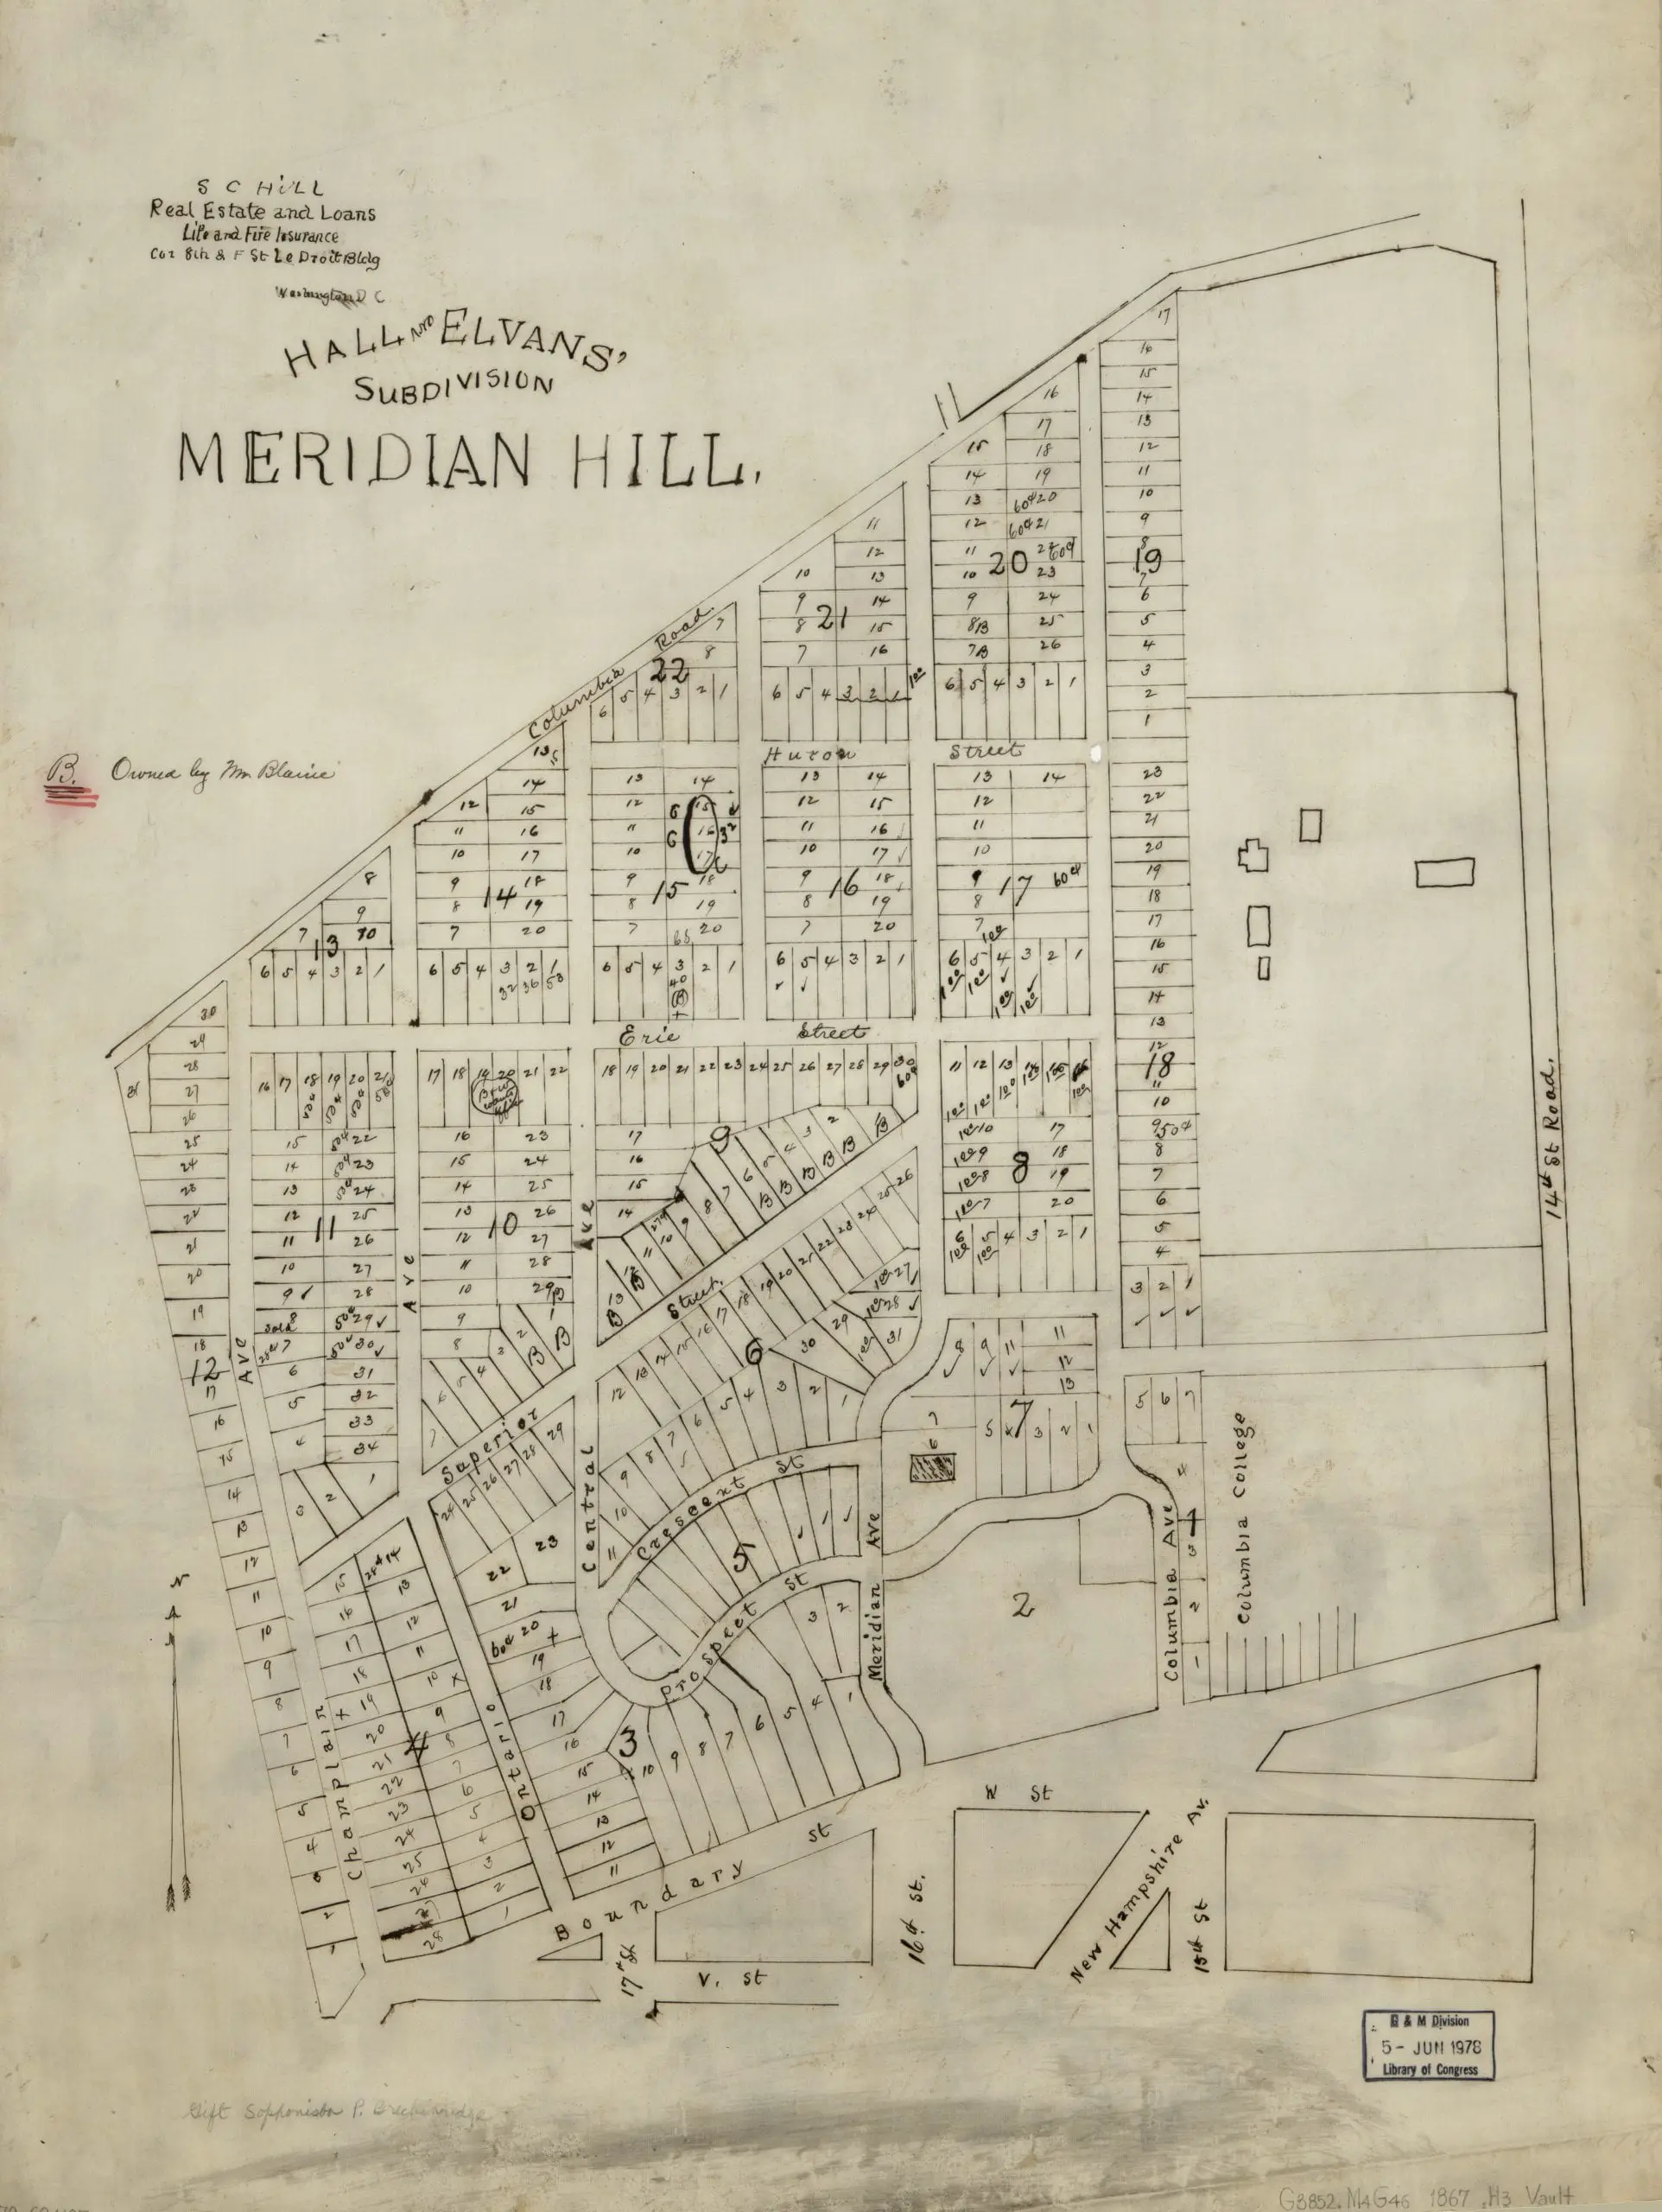 Hall and Elvans' subdivision of Meridian Hill in 1867